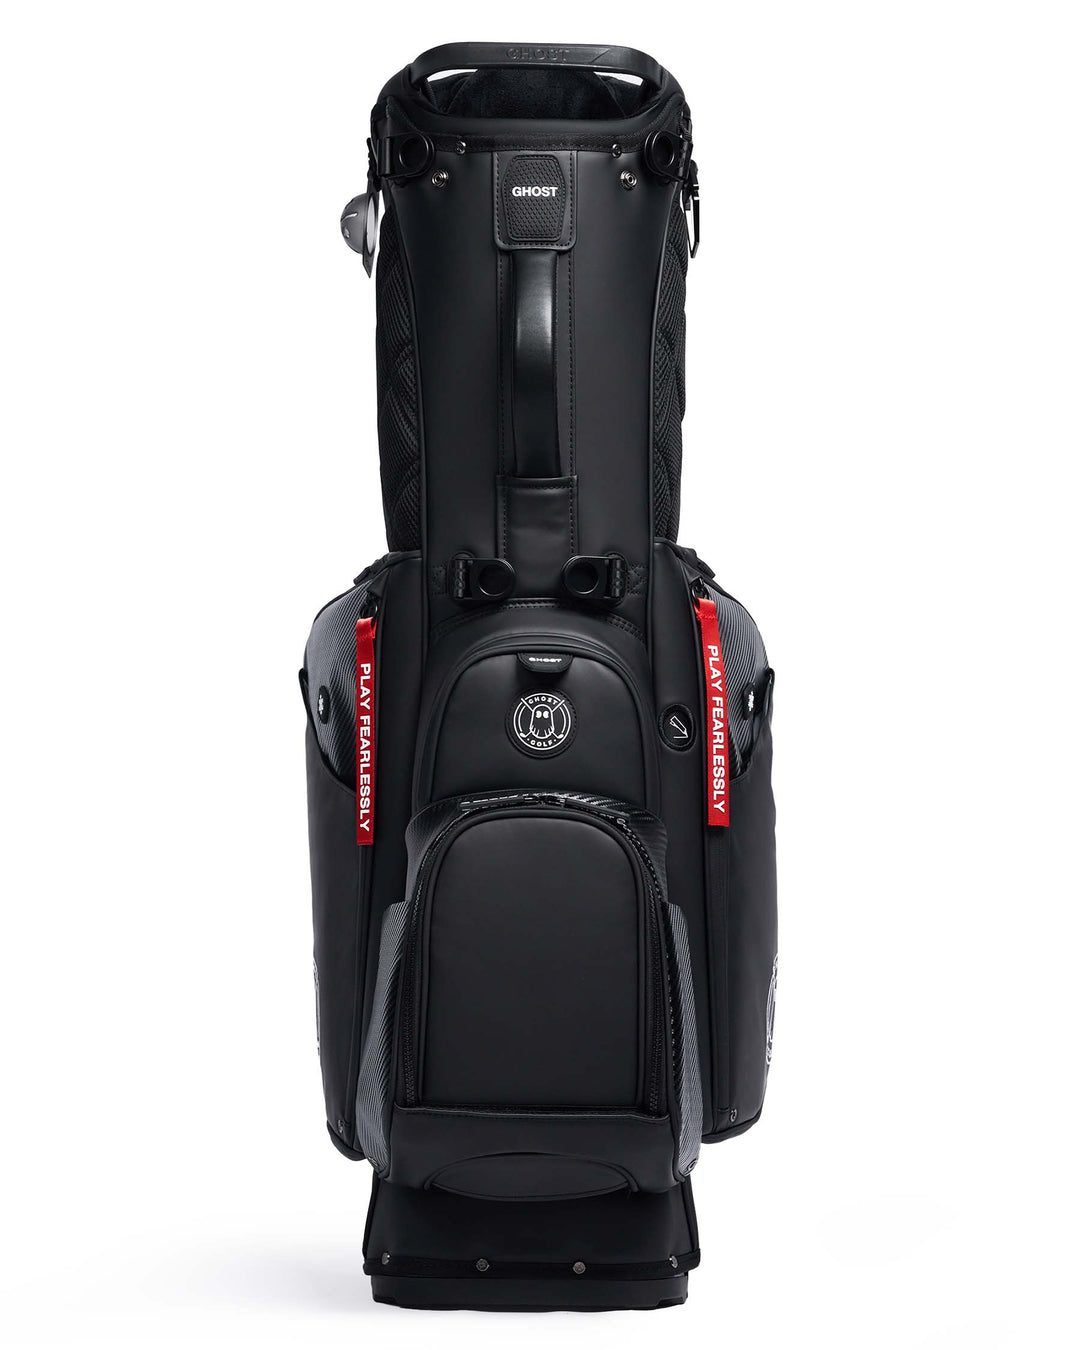 RONIN Black and Carbon Fiber Accents Golf Bag with Red Tags